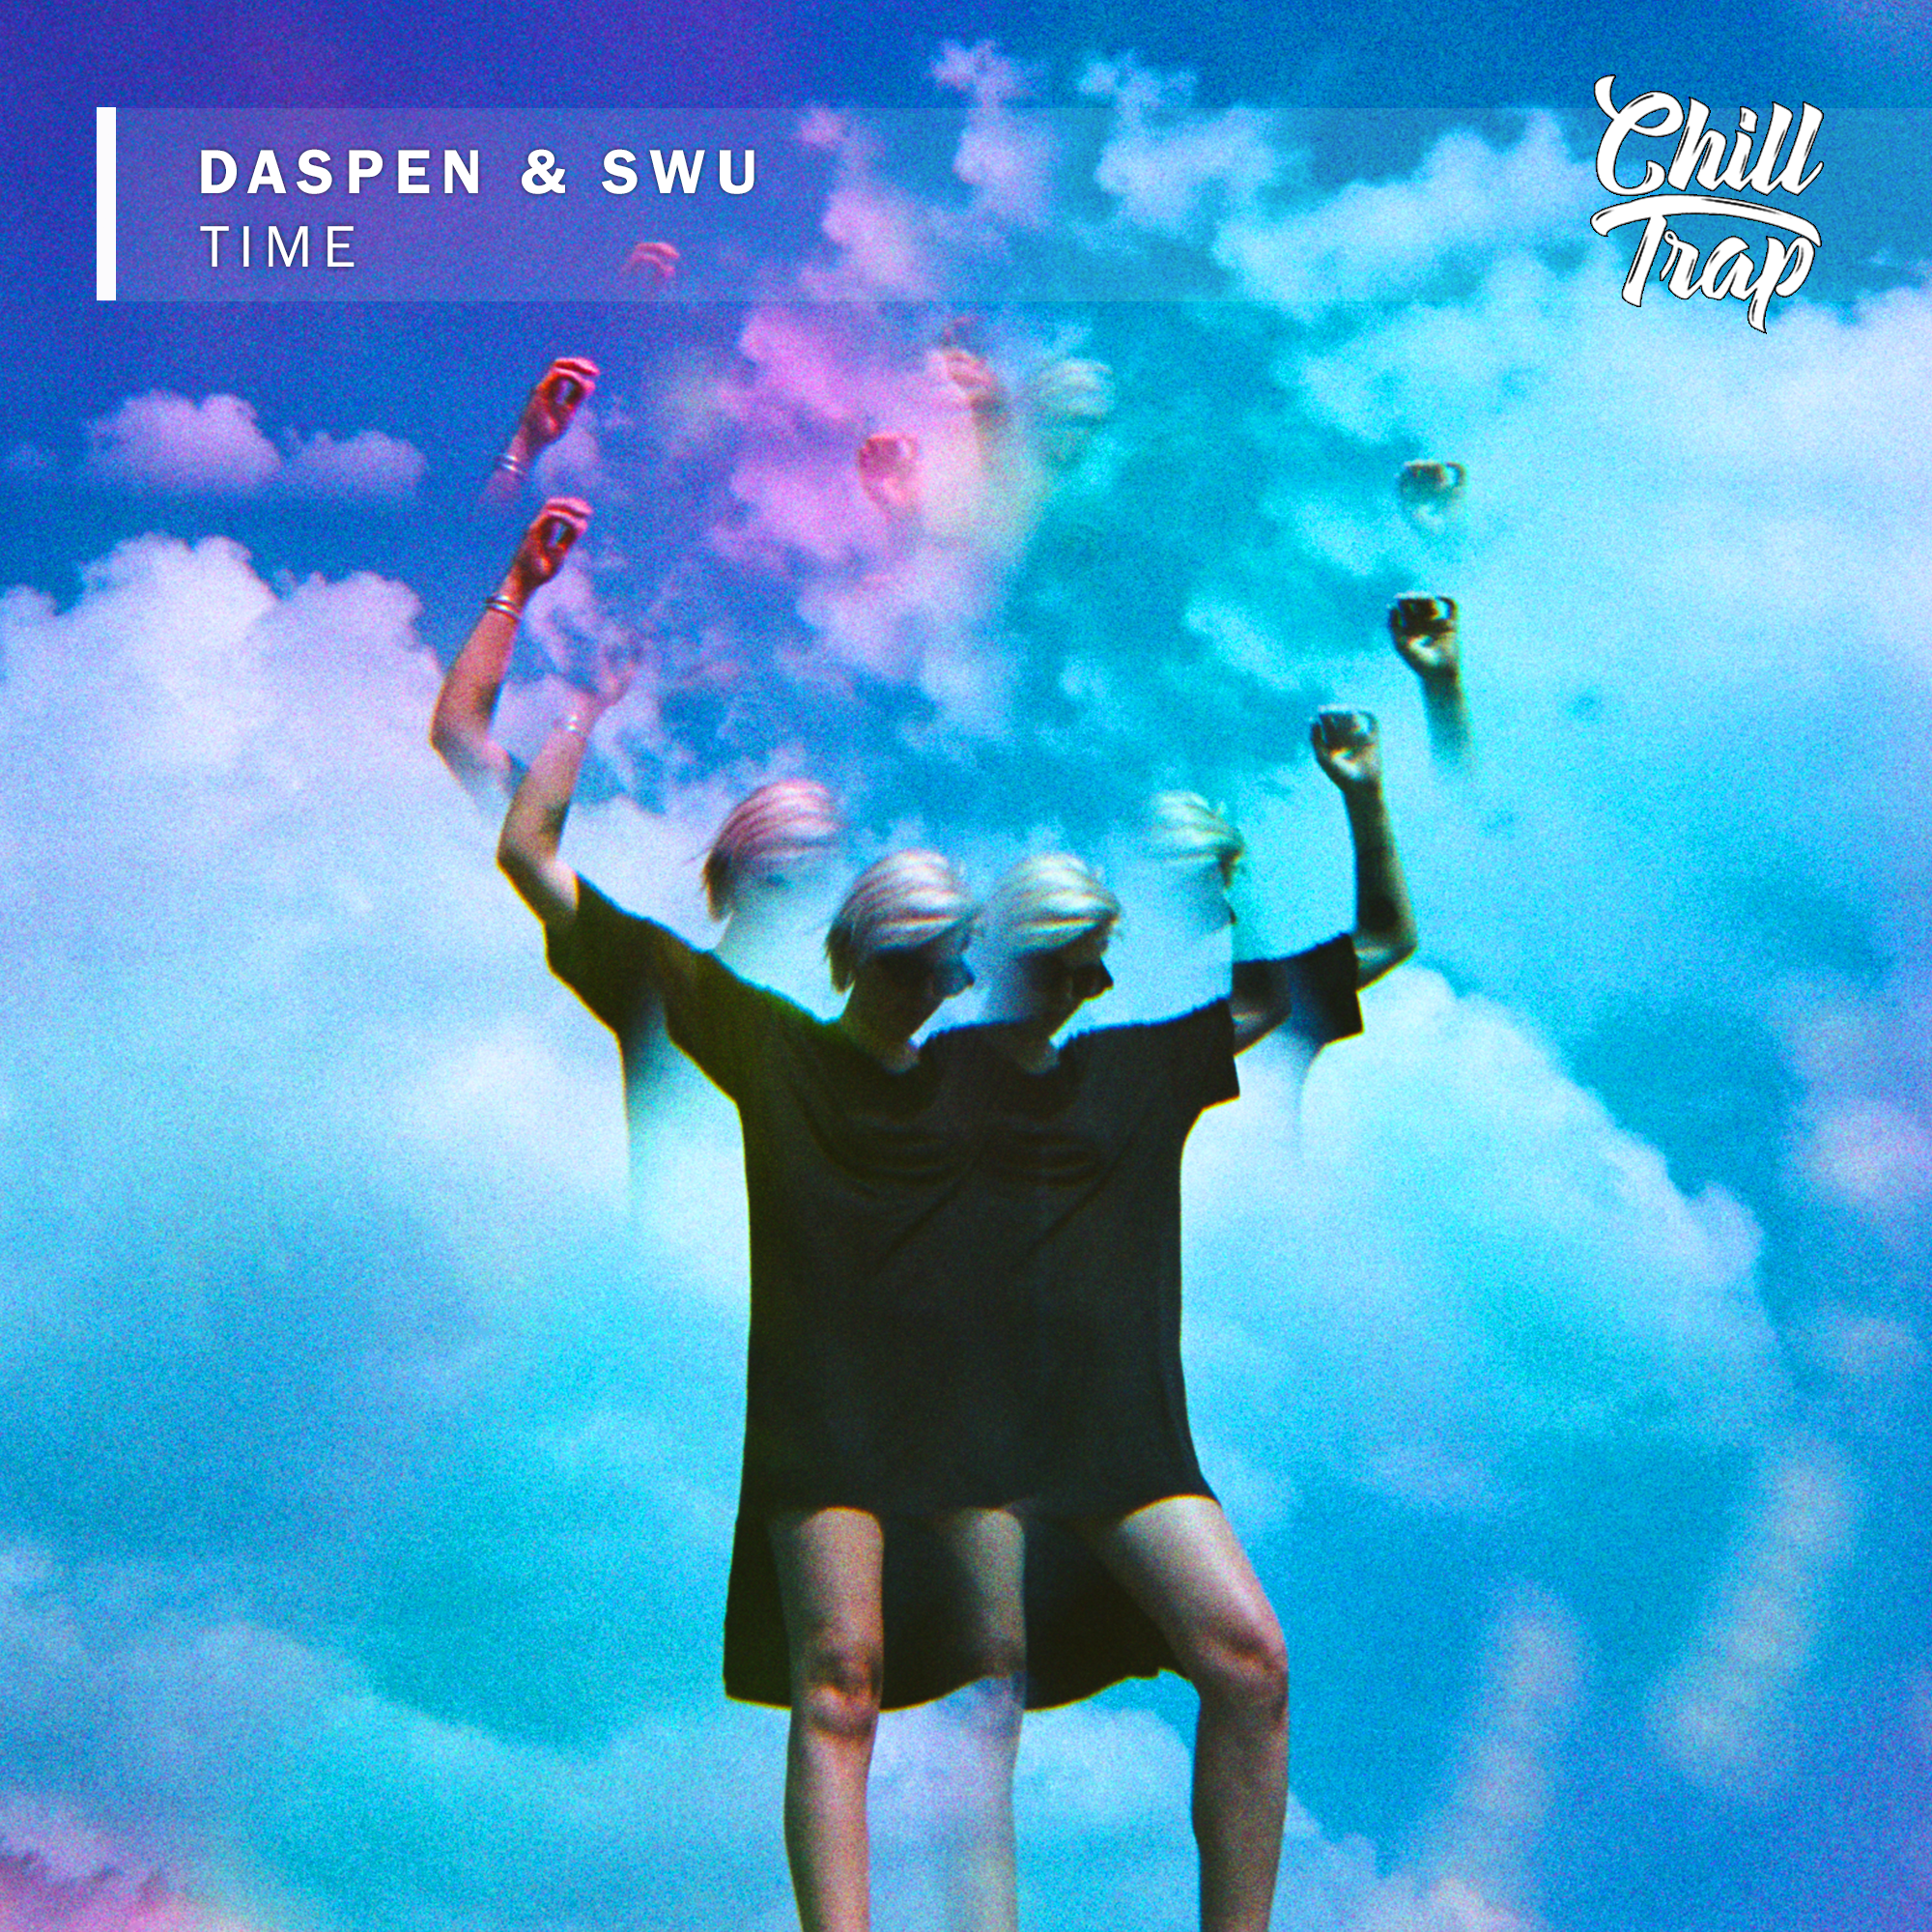 Daspen & SWU Tackle On-Point Chill Trap Sound in Collaboration “Time”